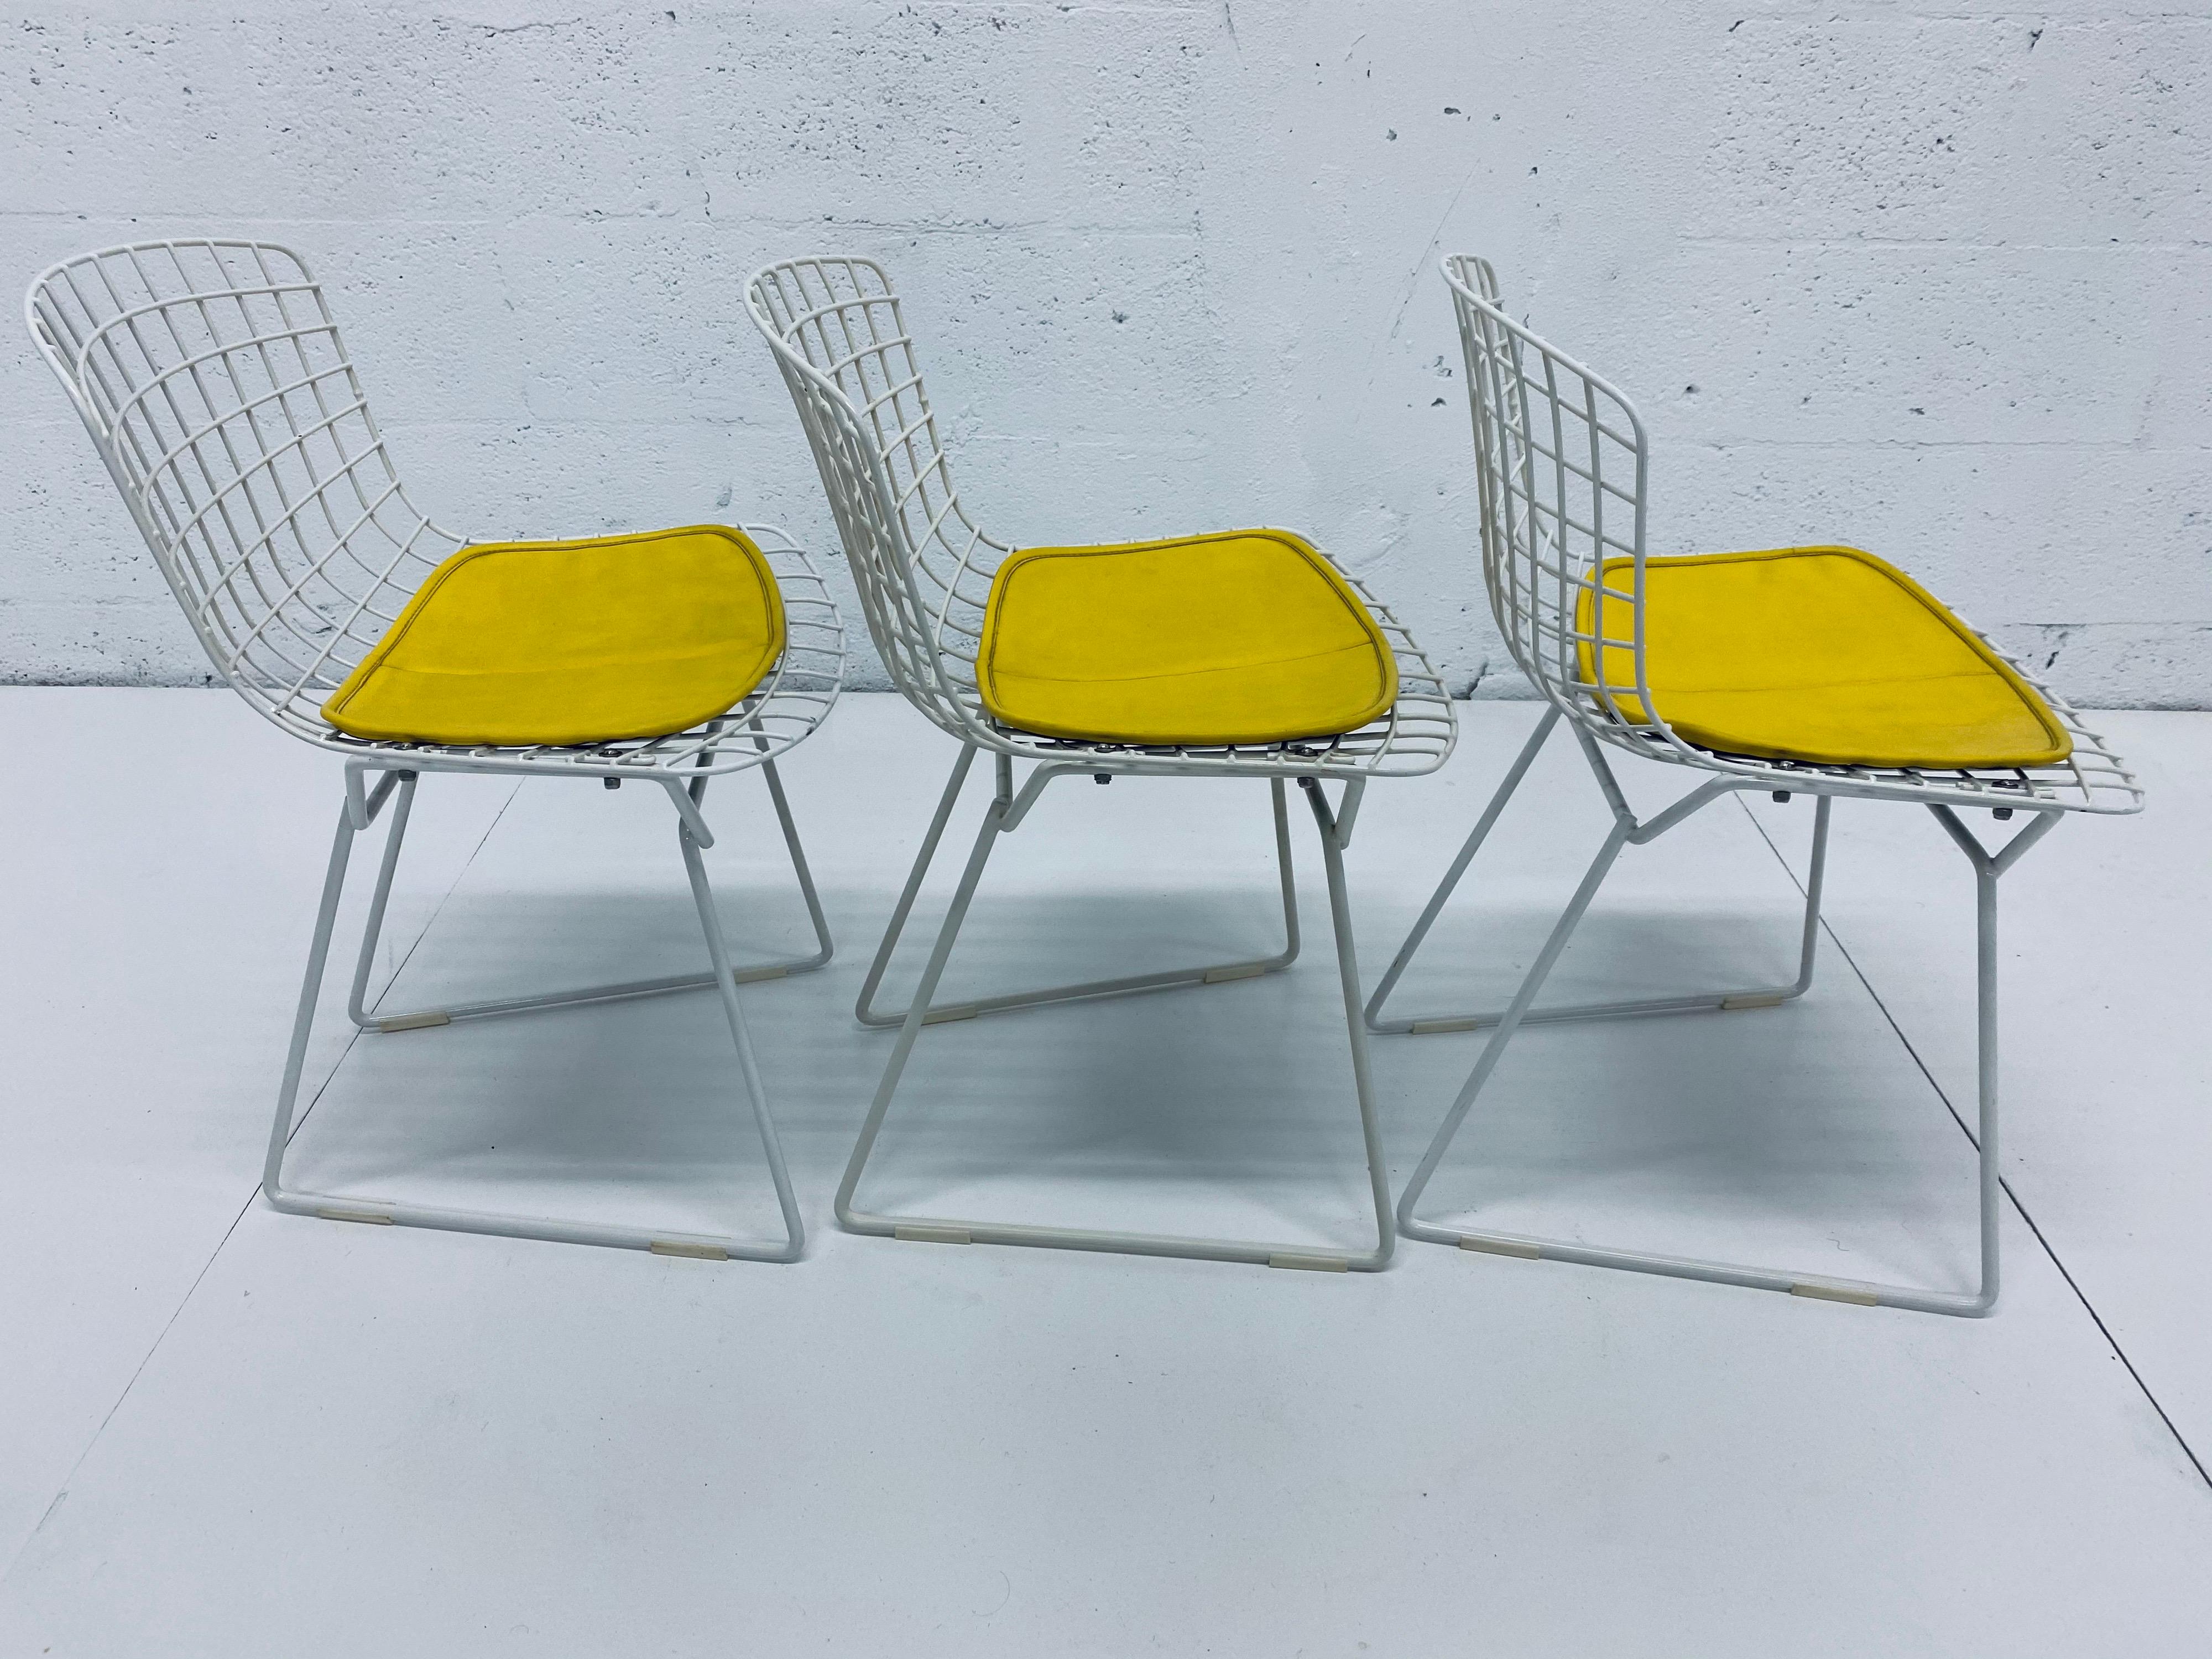 Steel Set of Three Harry Bertoia Children's Wire Chairs with Yellow Seats for Knoll